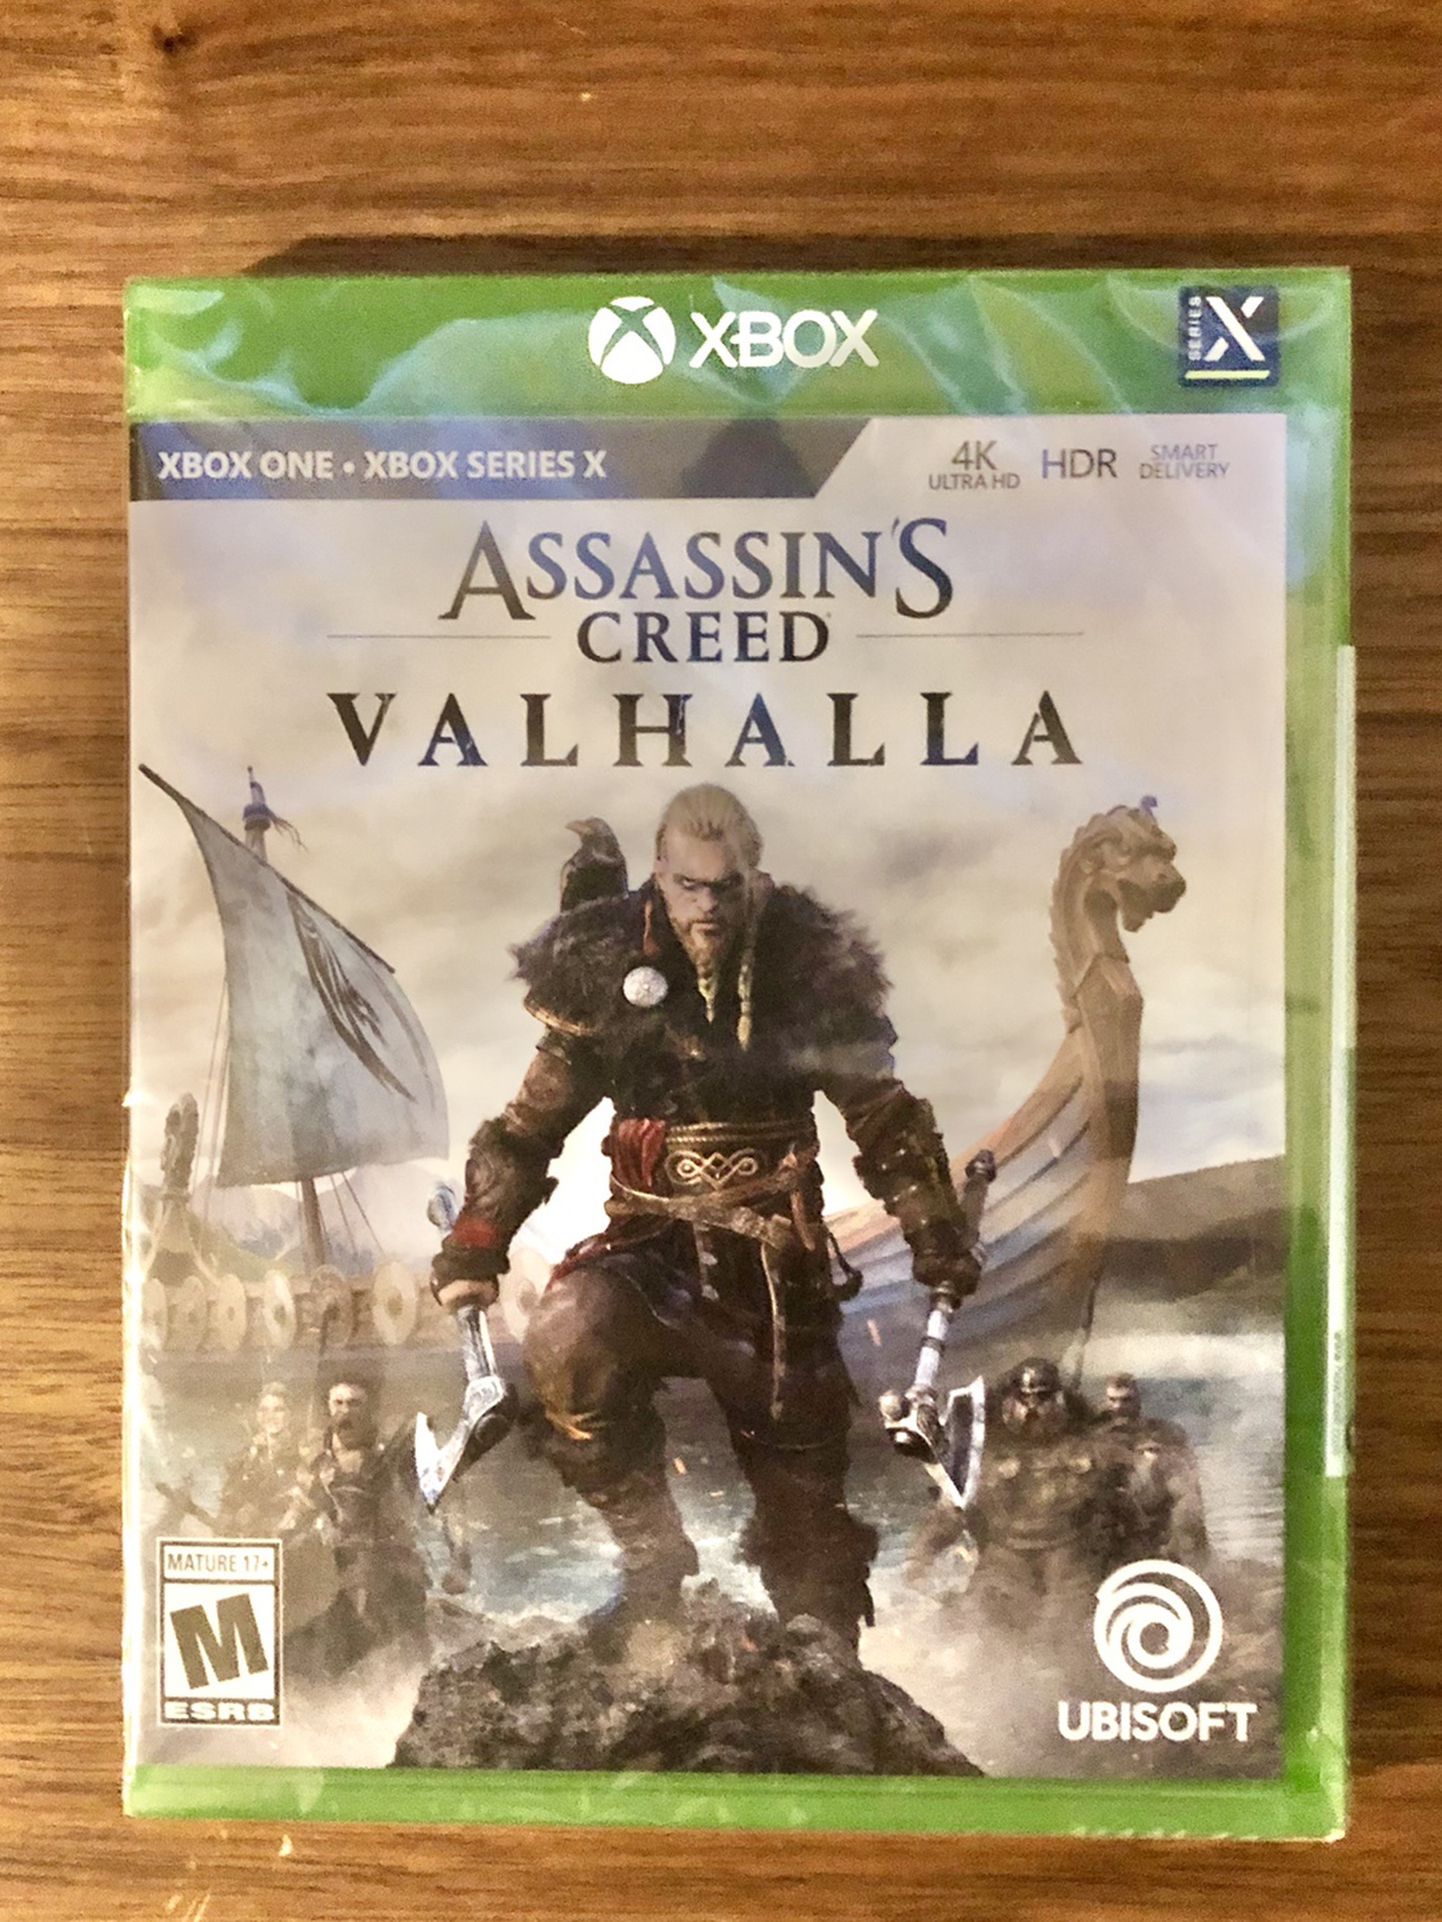 BRAND NEW FACTORY SEALED Assasins Creed Valhalla for Xbox Series X